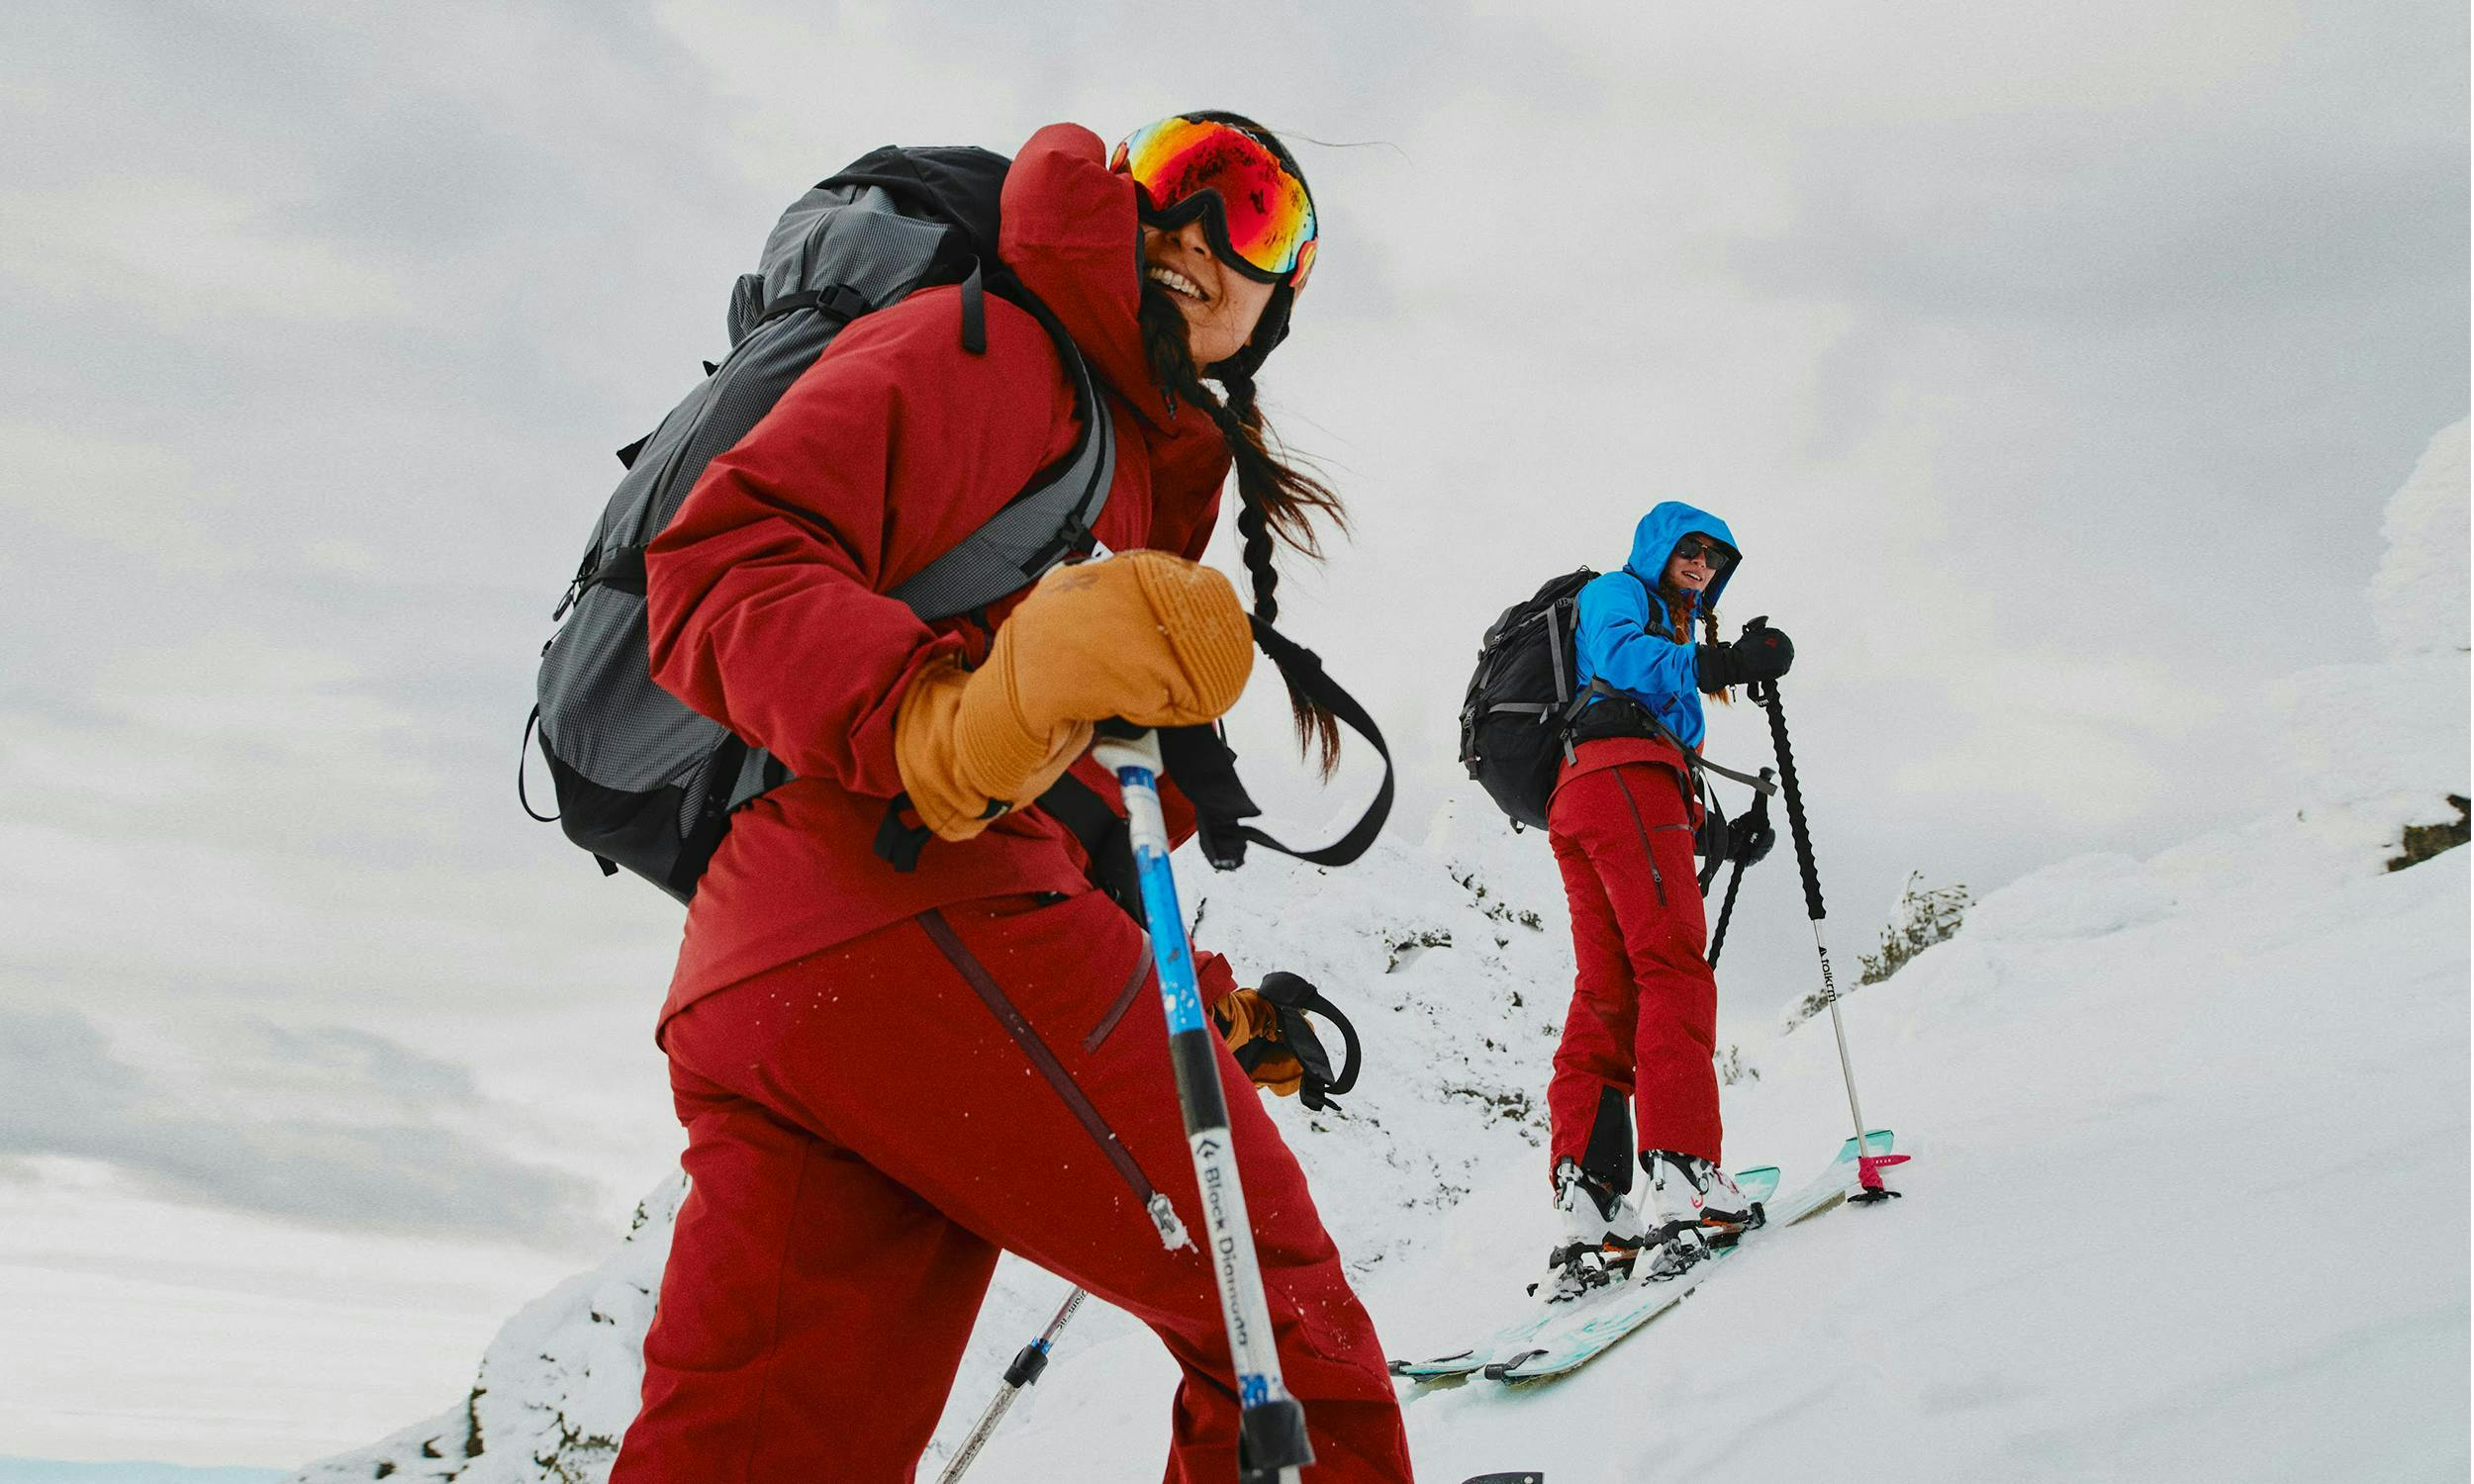 Two skiers skinning uphill, one in monochrome Apex gear, the other in colour-blocked Apex gear